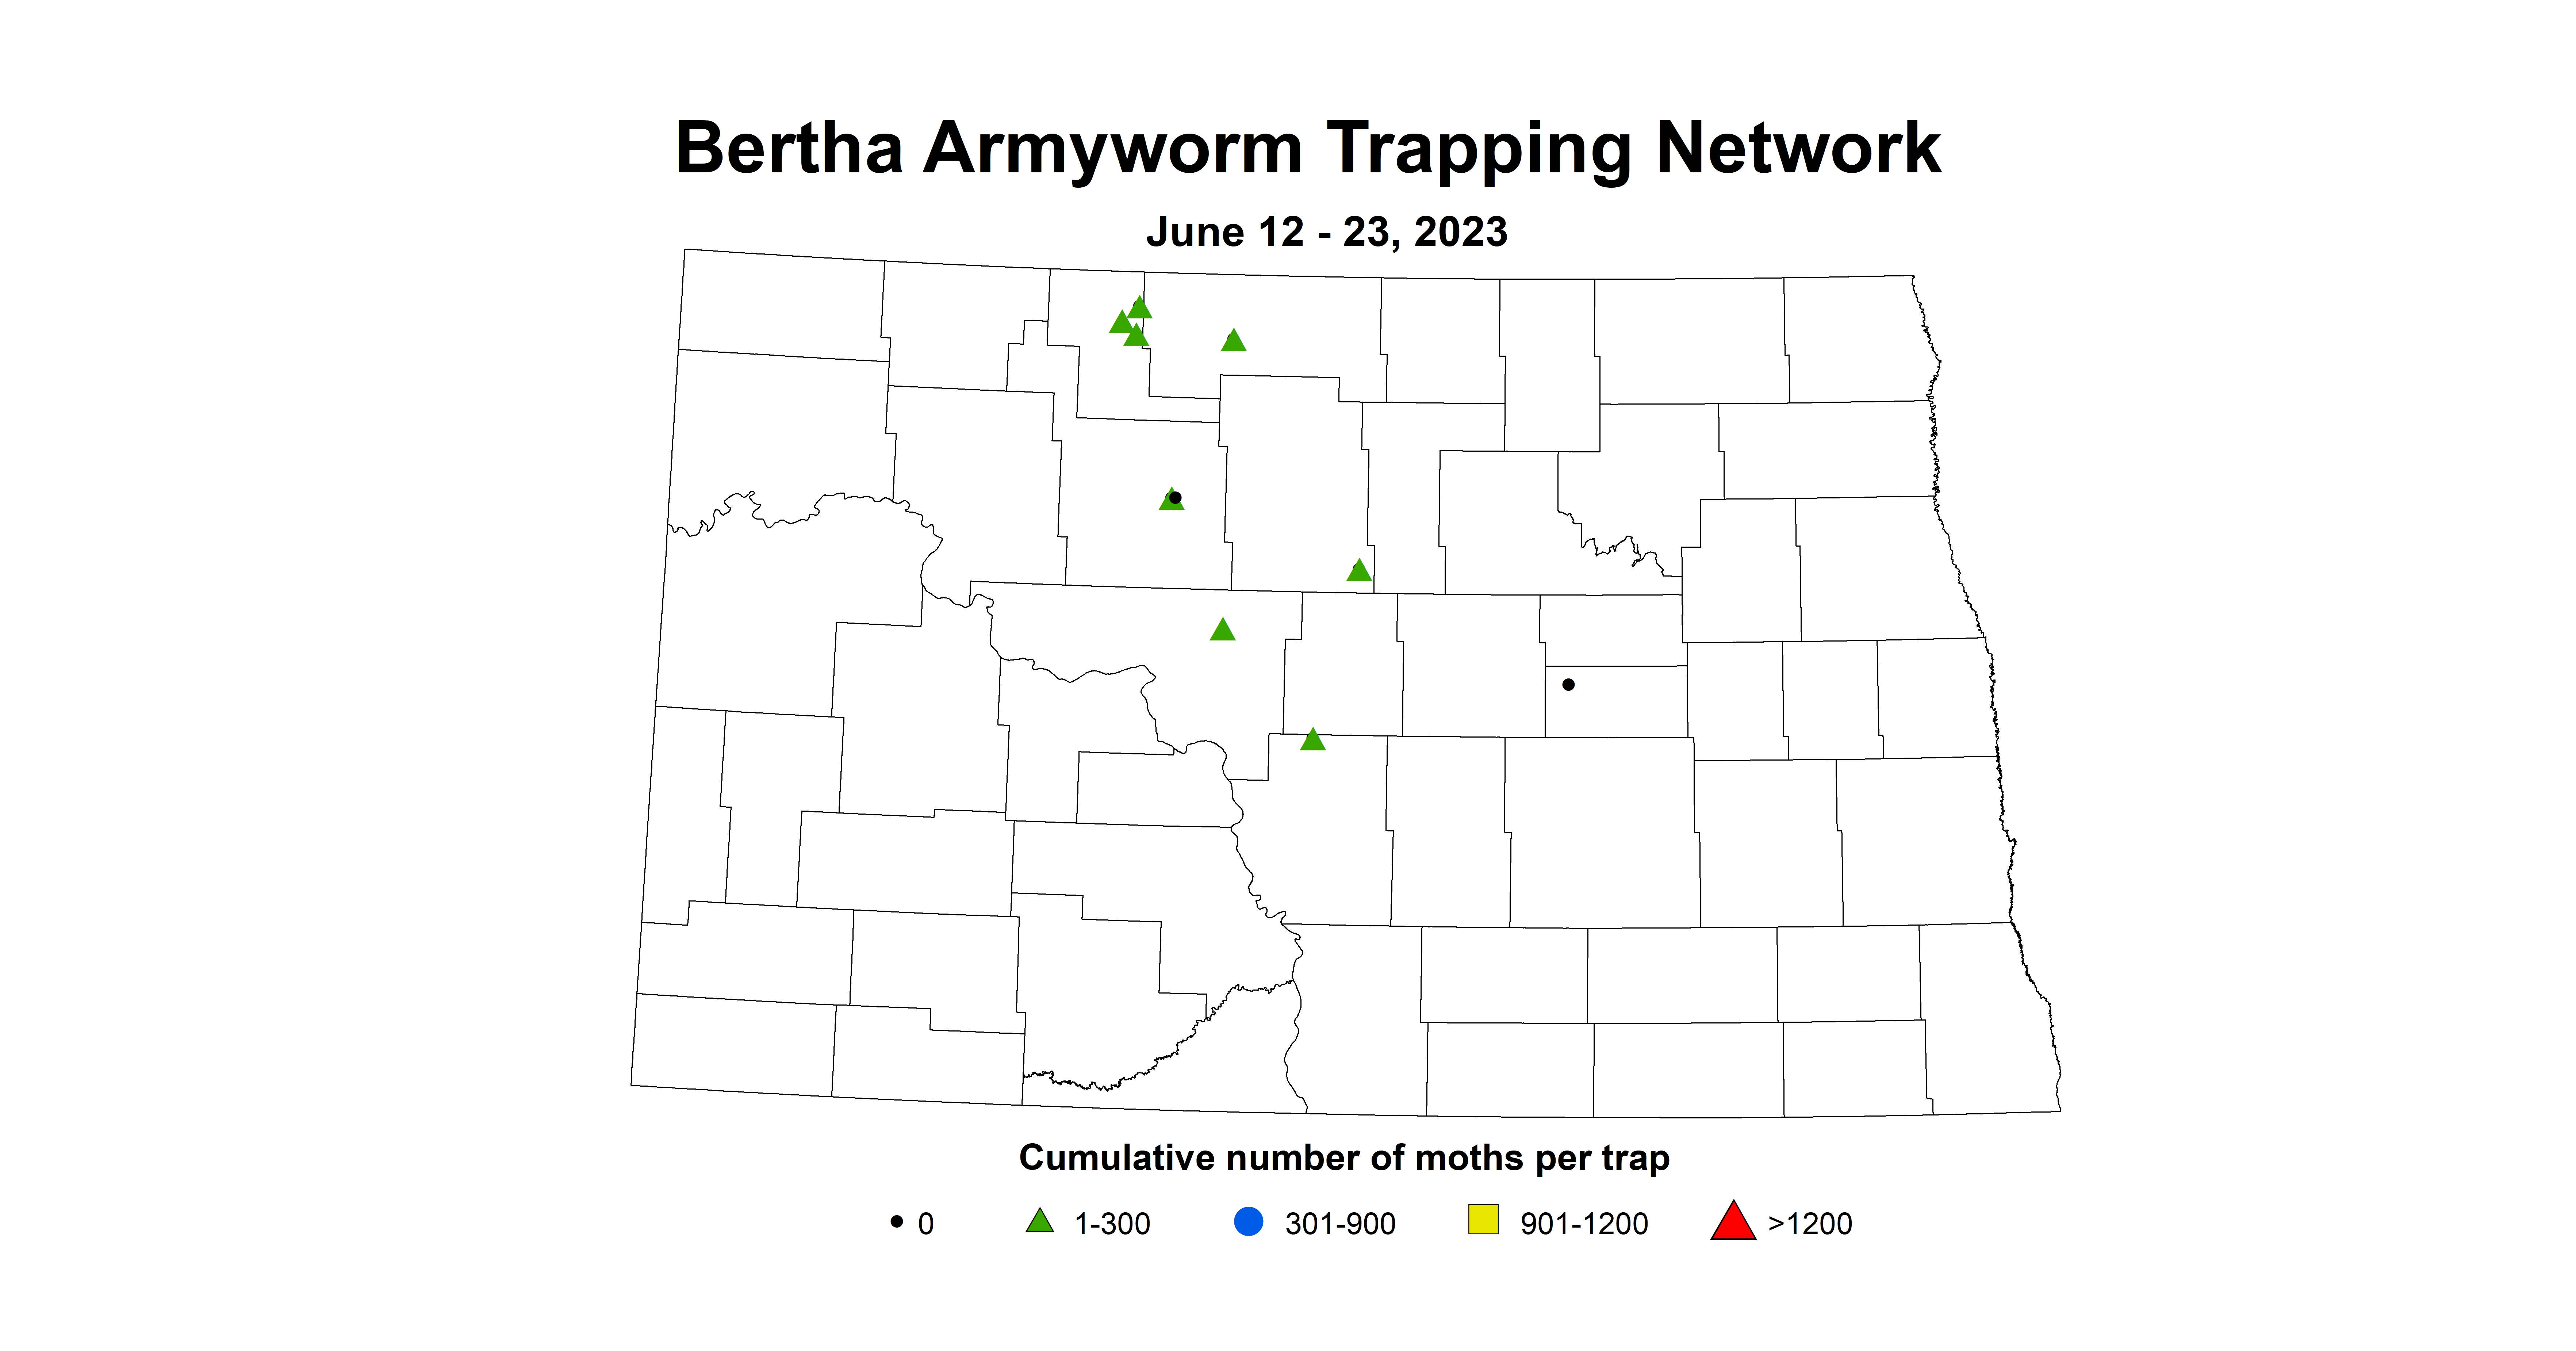 canola armyworm trapping June 12-23 2023